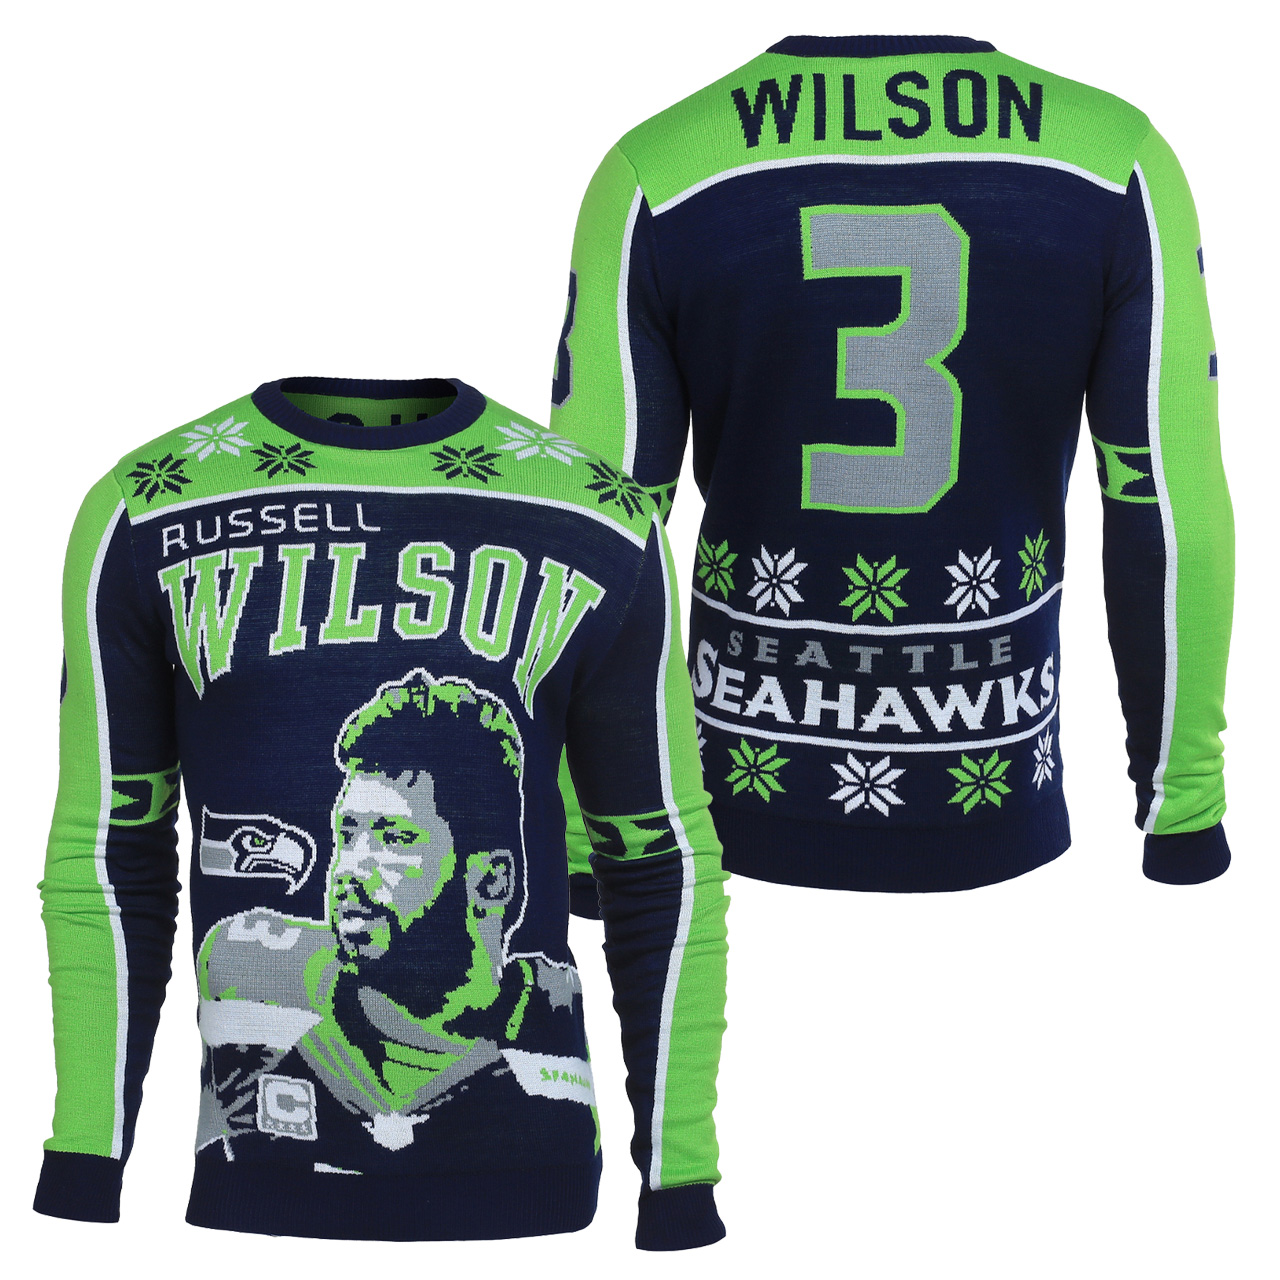 [ AWESOME ] Russell Wilson #3 Seattle Seahawks NFL Player Ugly Sweater – Saleoff 081221